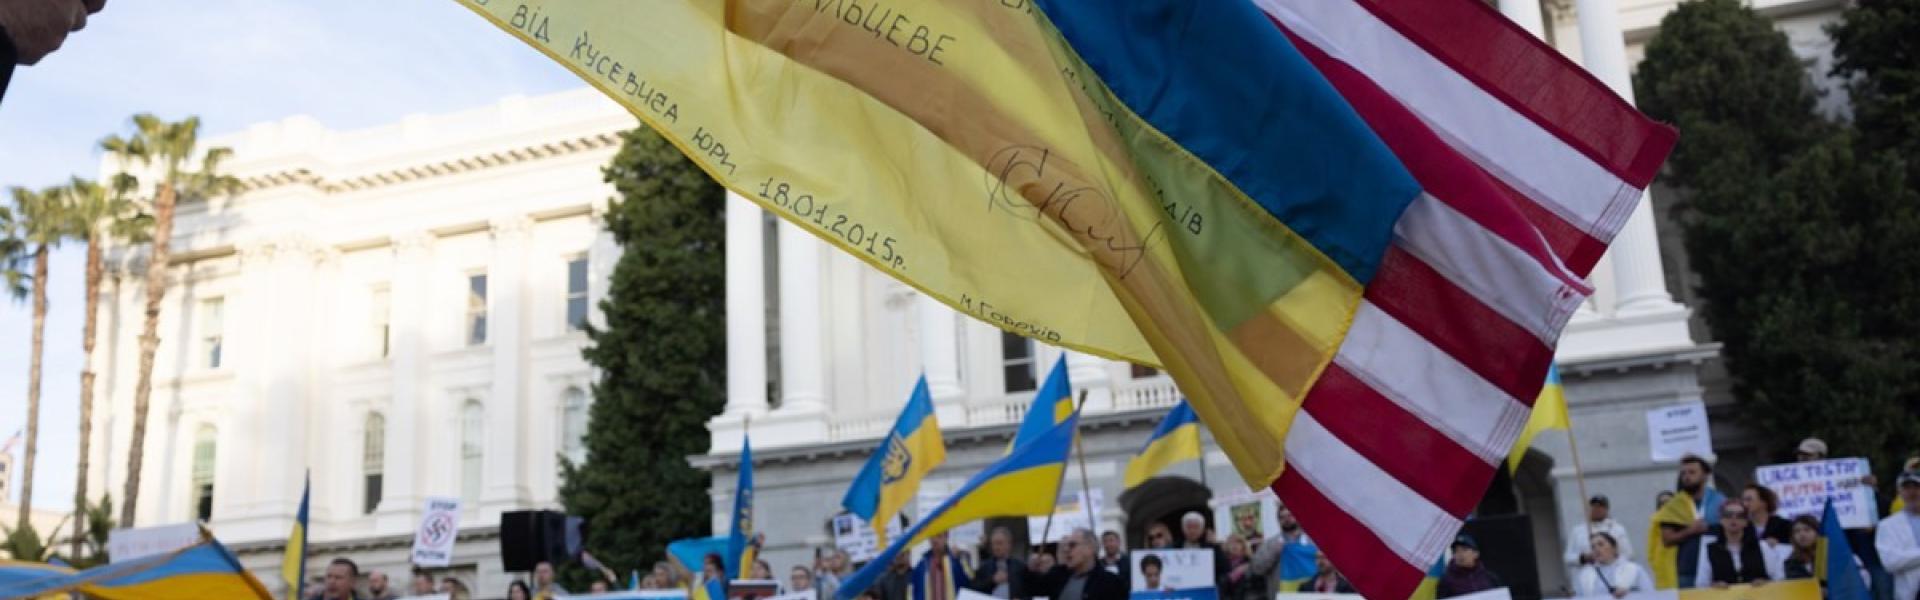 Protest in support of Ukraine